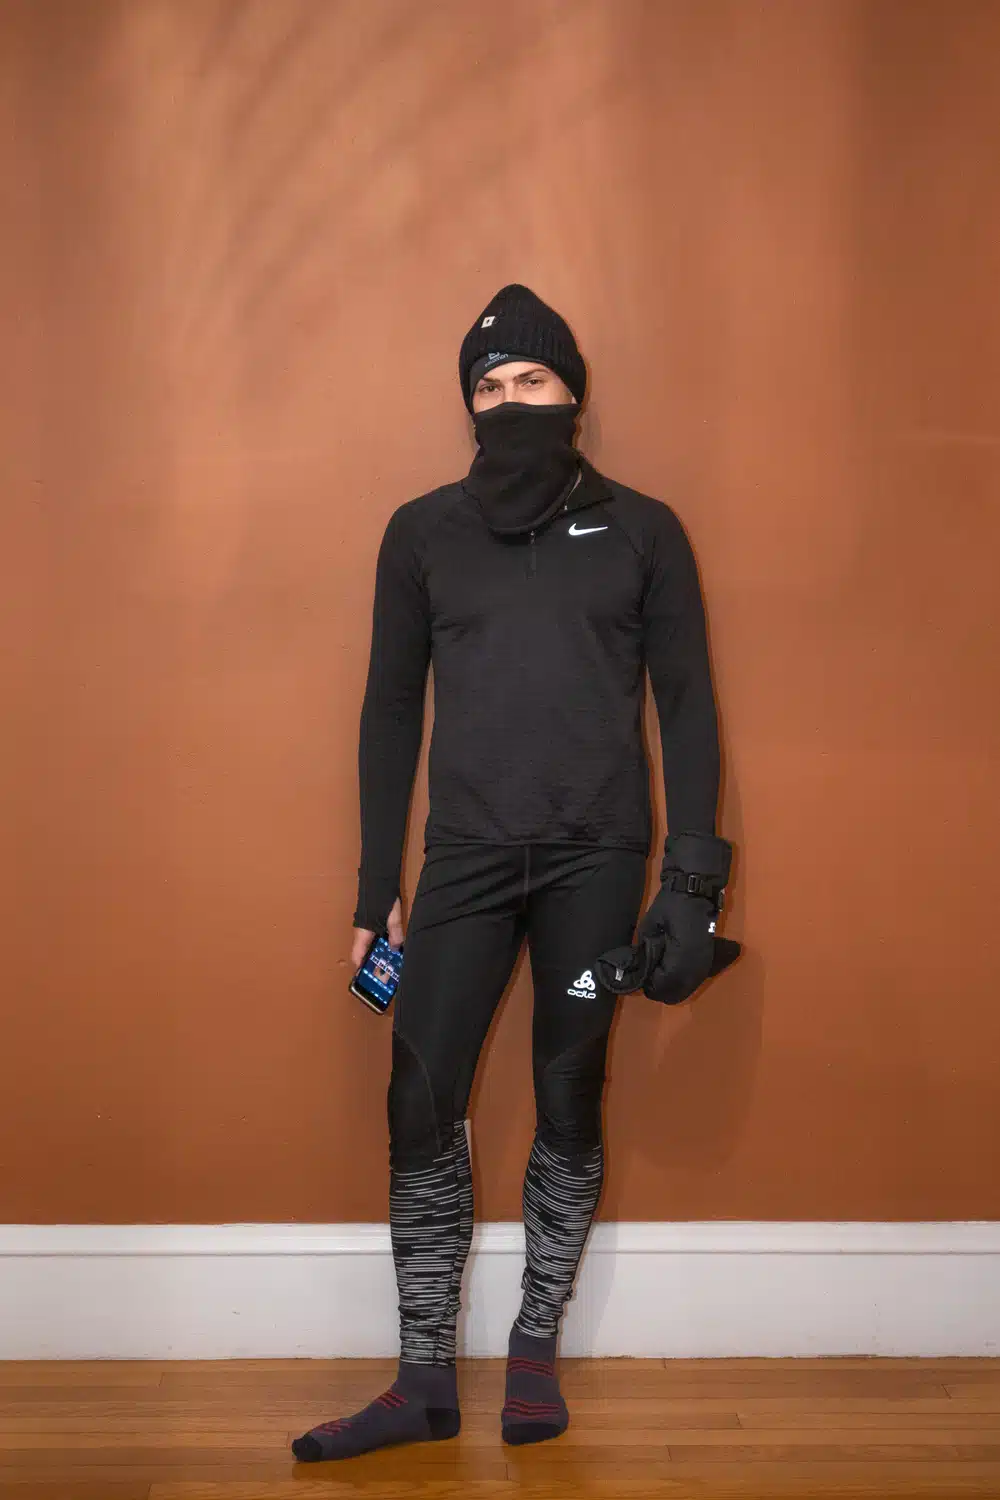 Men's Running Outfits for Any Weather (This Is What You Should Wear)